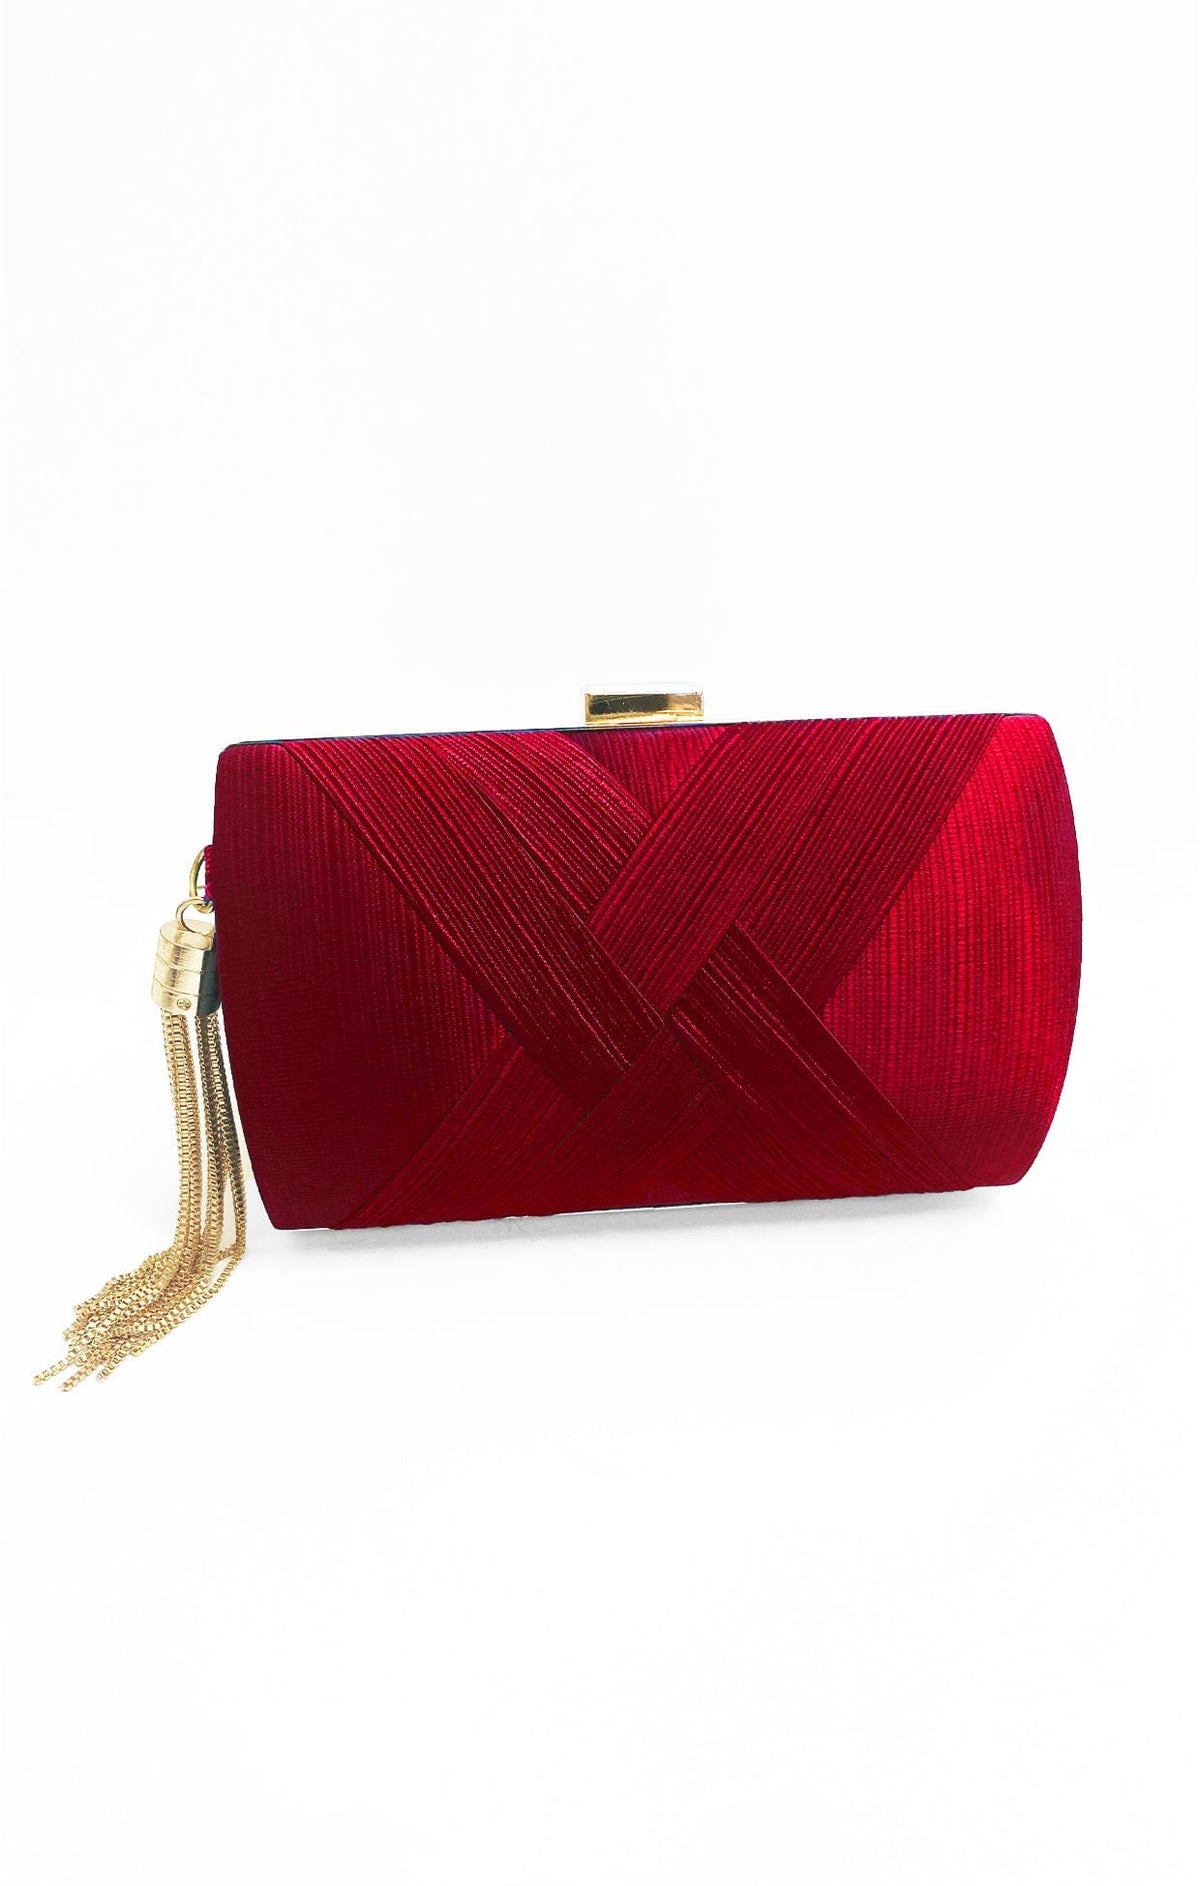 ACCESSORIES Bags Clutches One Size / Red DEANNA EVENING BAG IN RED